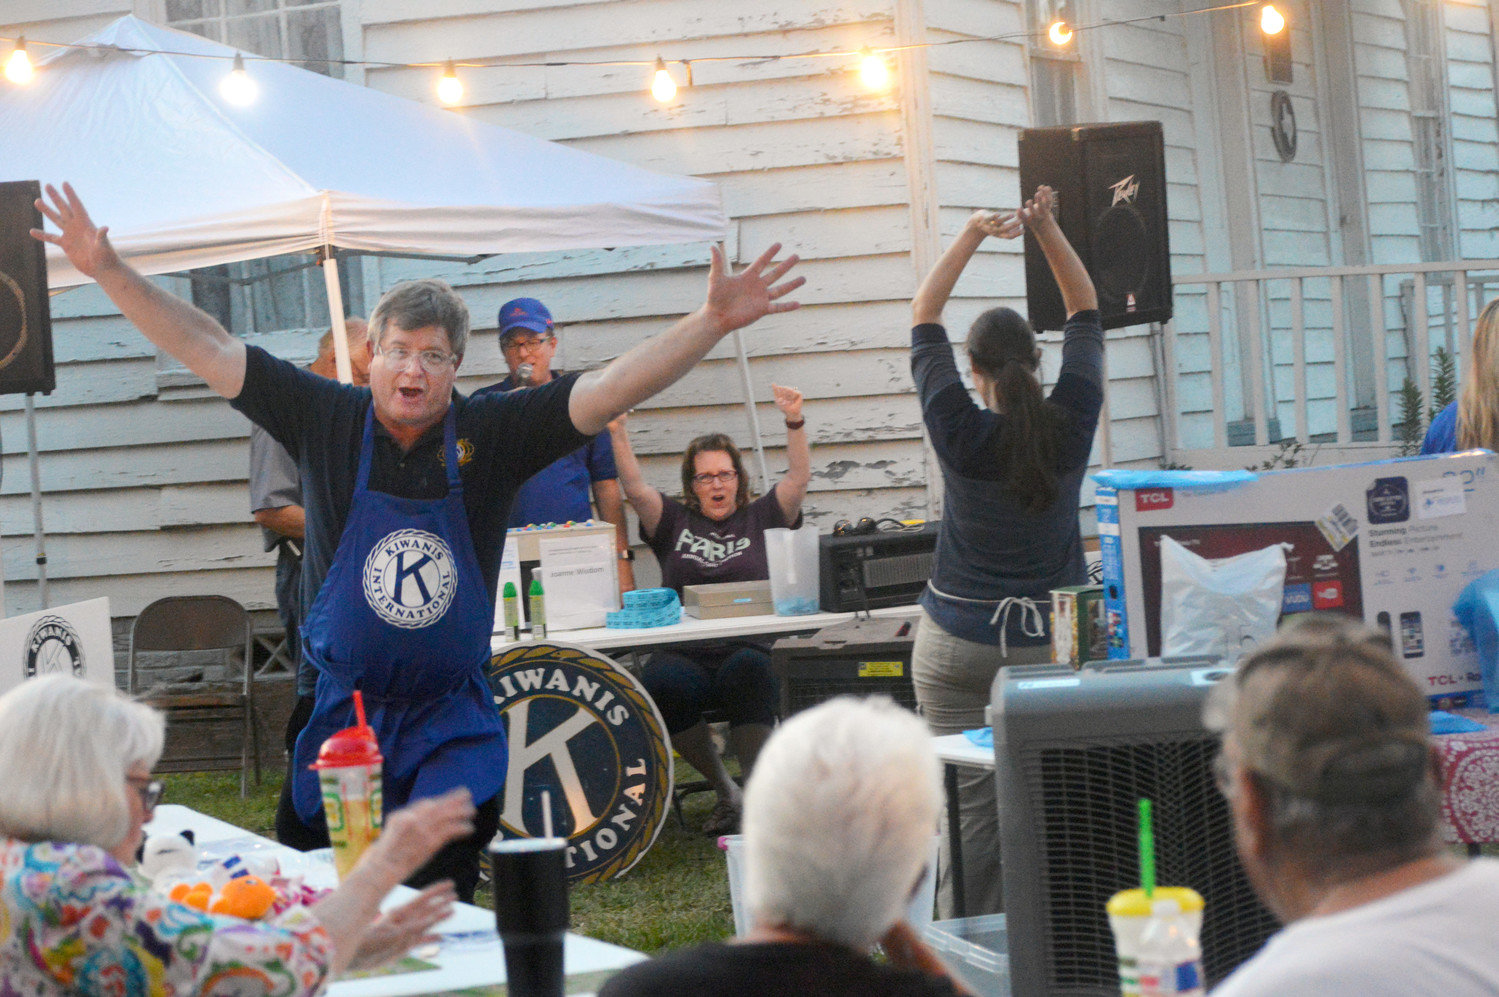 ABOVE: Dr. Randy Bennett celebrates a winner with the Bingo Wave cheer during the Quitman-Lake Fork Kiwanis Club Bingo event at the Old Settlers Reunion Saturday night in Quitman.